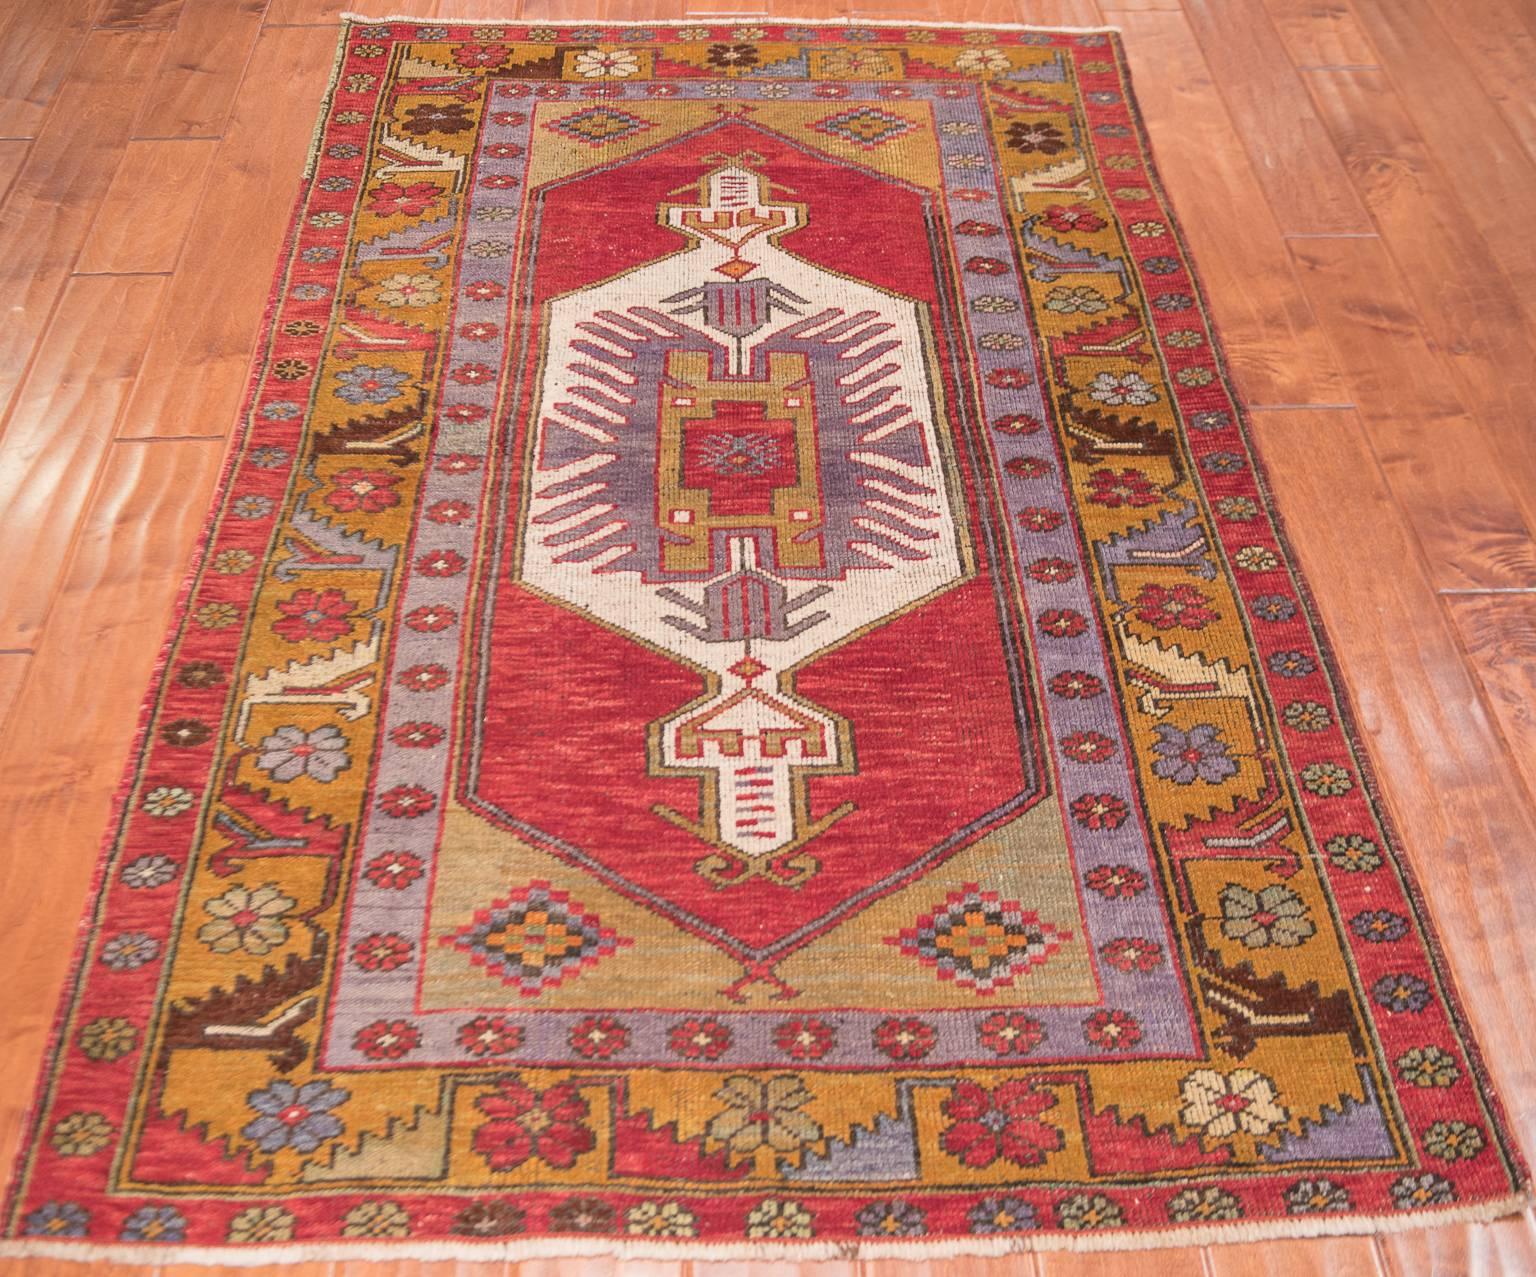 Vintage Anatolian Nigde rug.
Niğde is the market place for the surrounding area, and many rugs woven in the surrounding villages are sold under the trade name of Niğde. This rug is composed using the prayer niche design, meaning the niche and